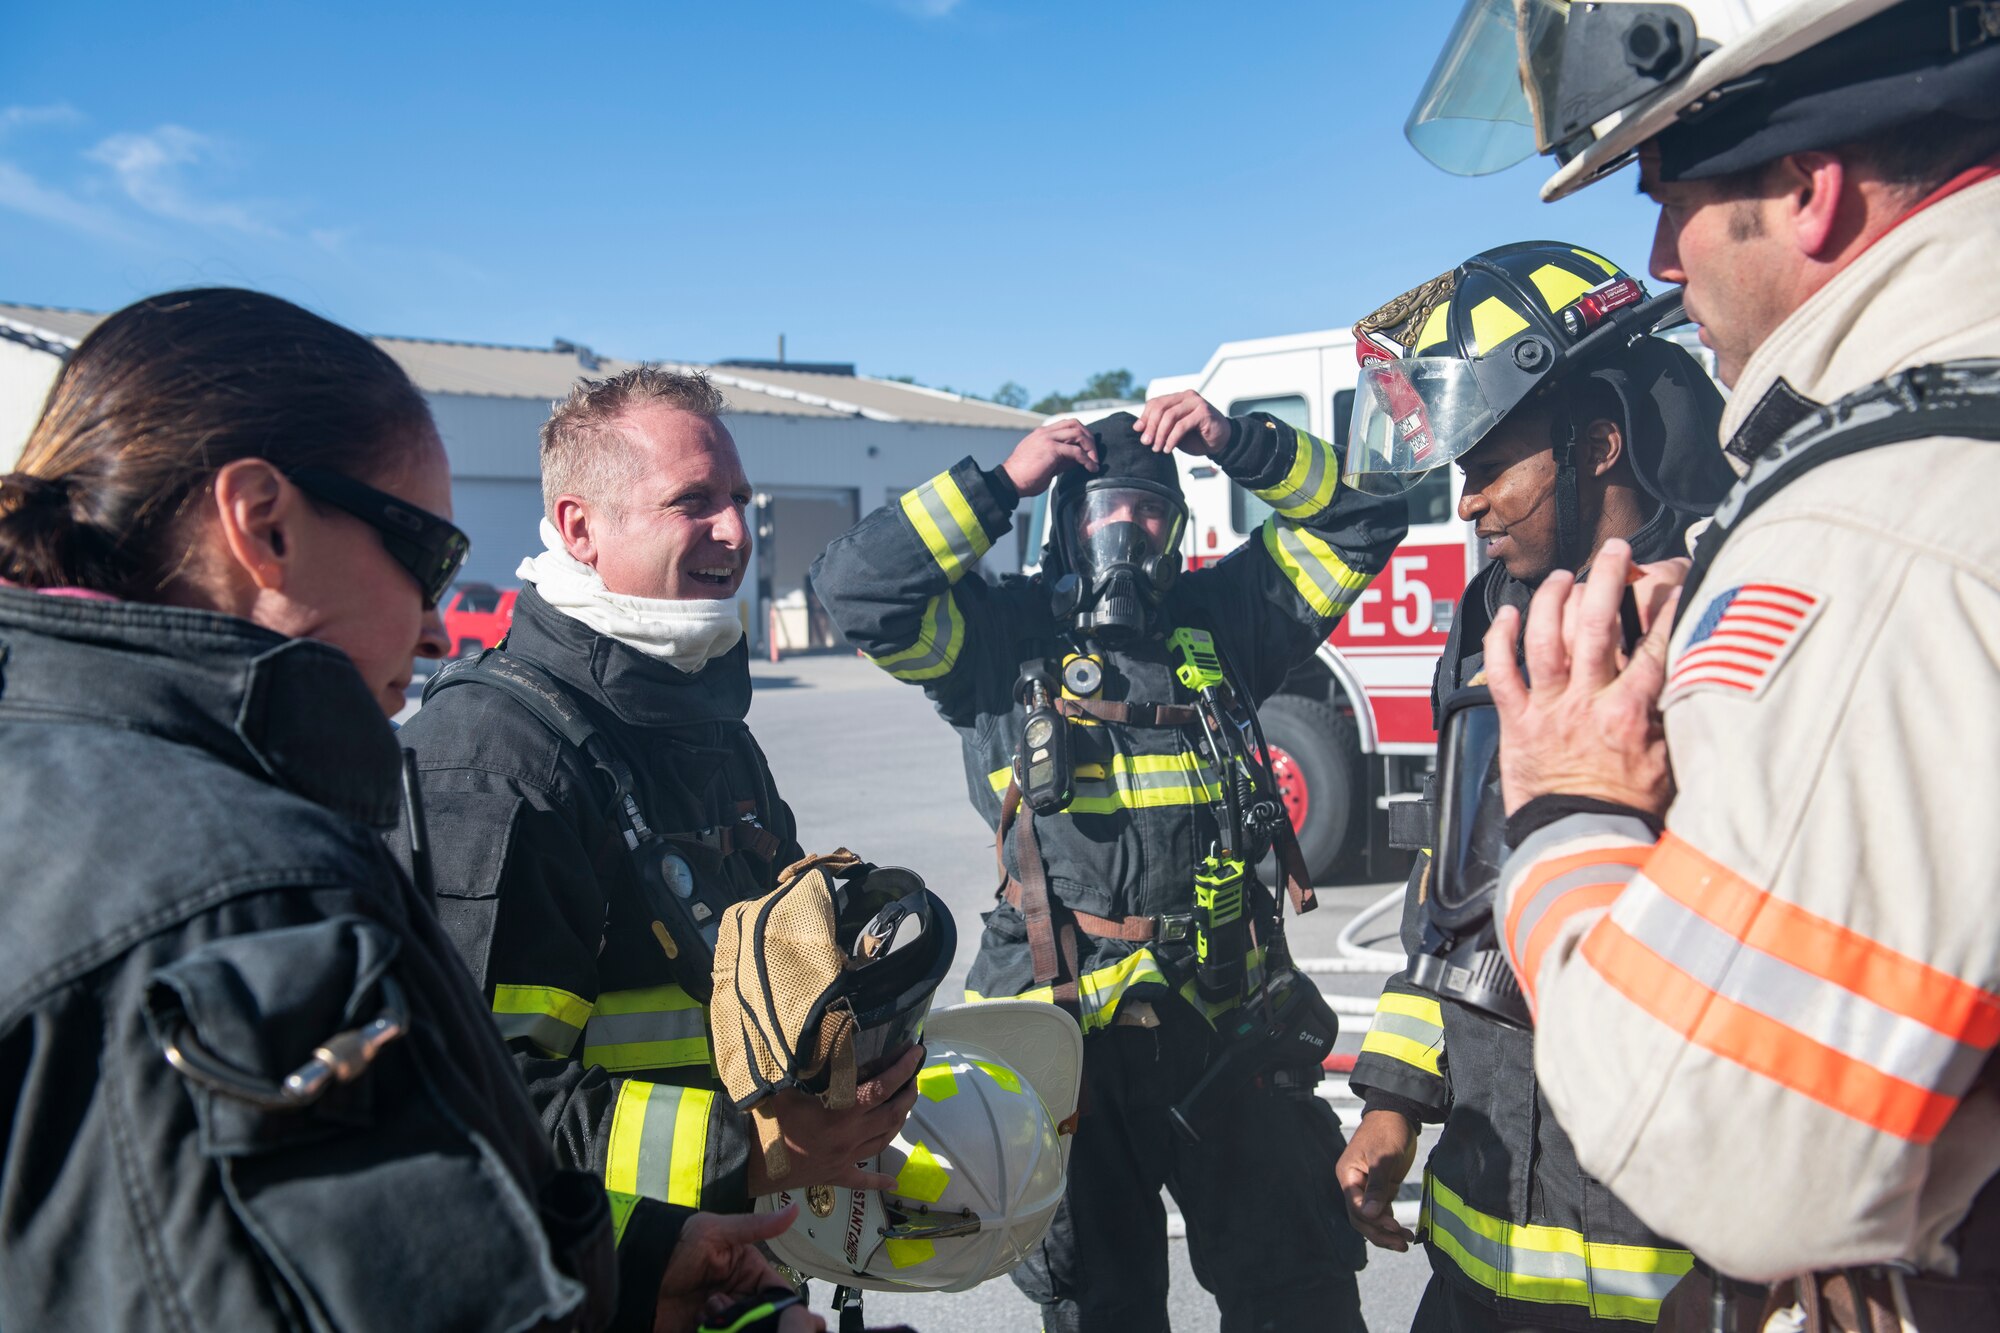 U.S. Air Force Col. Brian Laidlaw, 325th Fighter Wing commander (second from right), shares his experience with 325th Civil Engineer Squadron fire fighters after a simulated burning building exercise at Tyndall Air Force Base, Fla., Dec. 20, 2019. Laidlaw joined select 325th CES Airmen to experience fire fighting first hand. (U.S. Air Force photo by Senior Airman Stefan Alvarez)